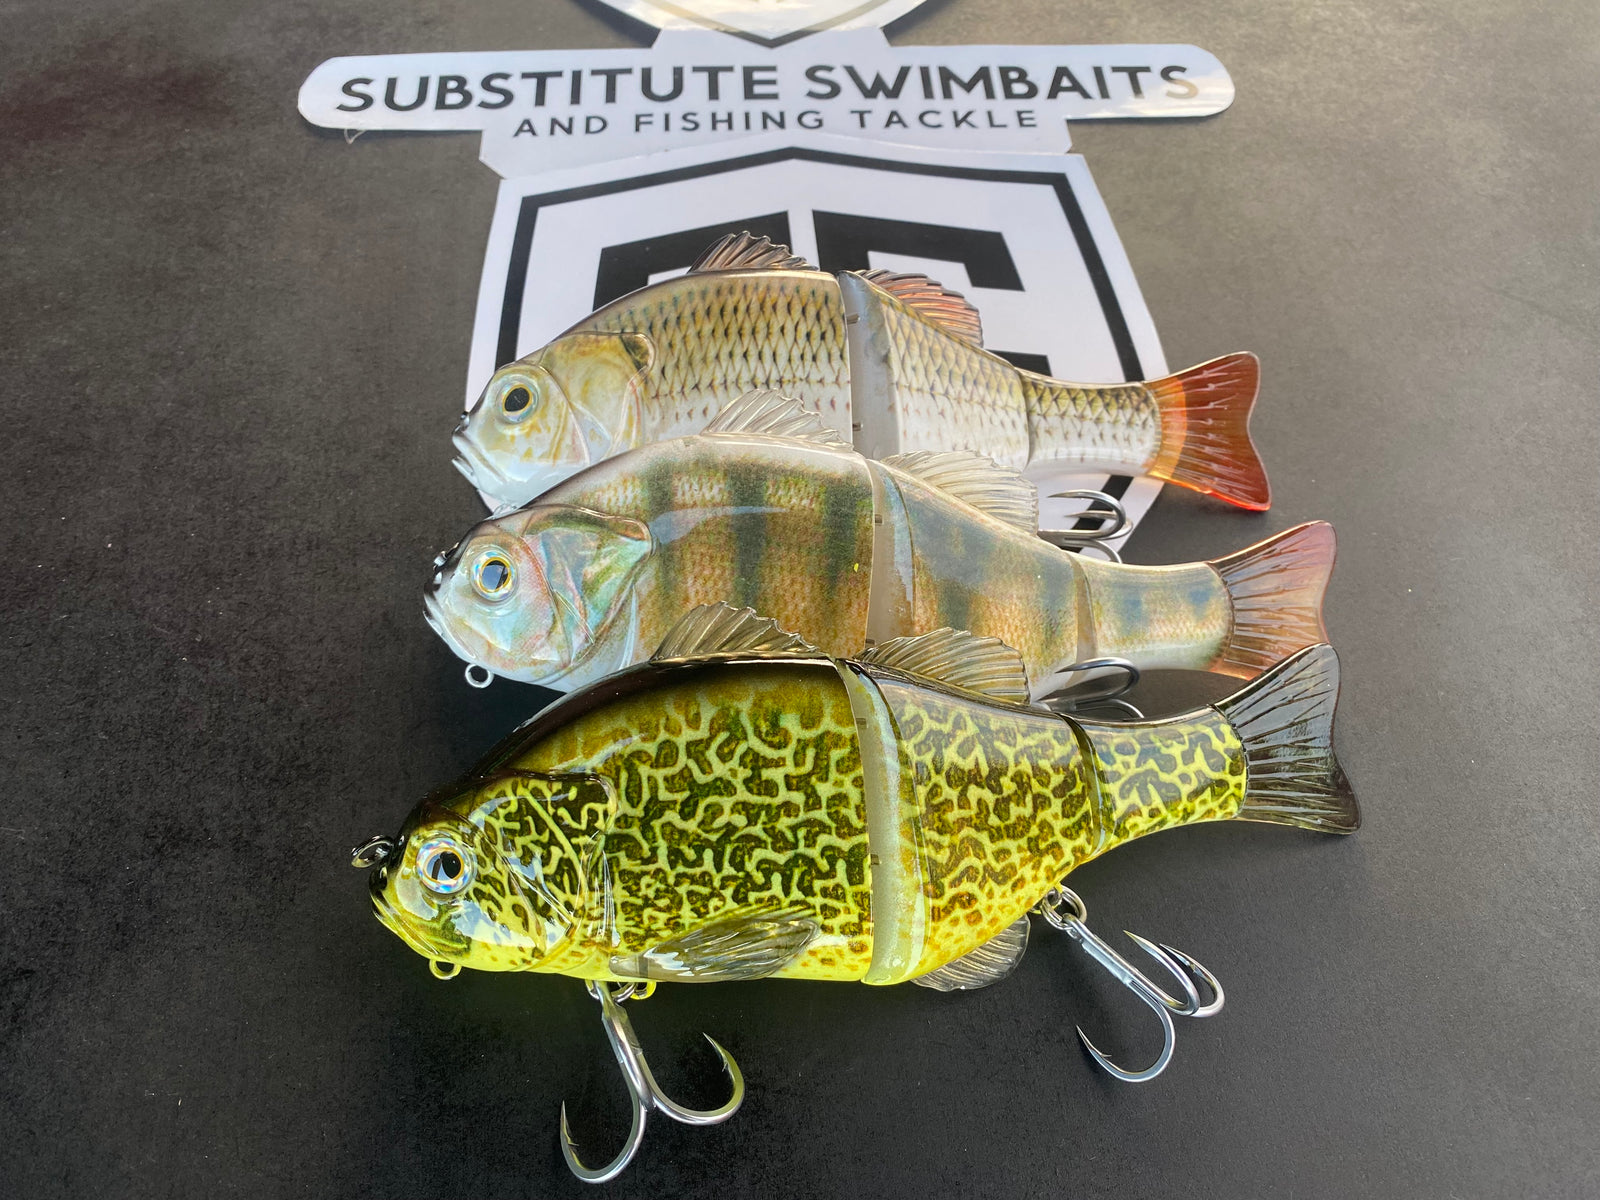 Products - Substitute Swimbaits & Fishing Tackle